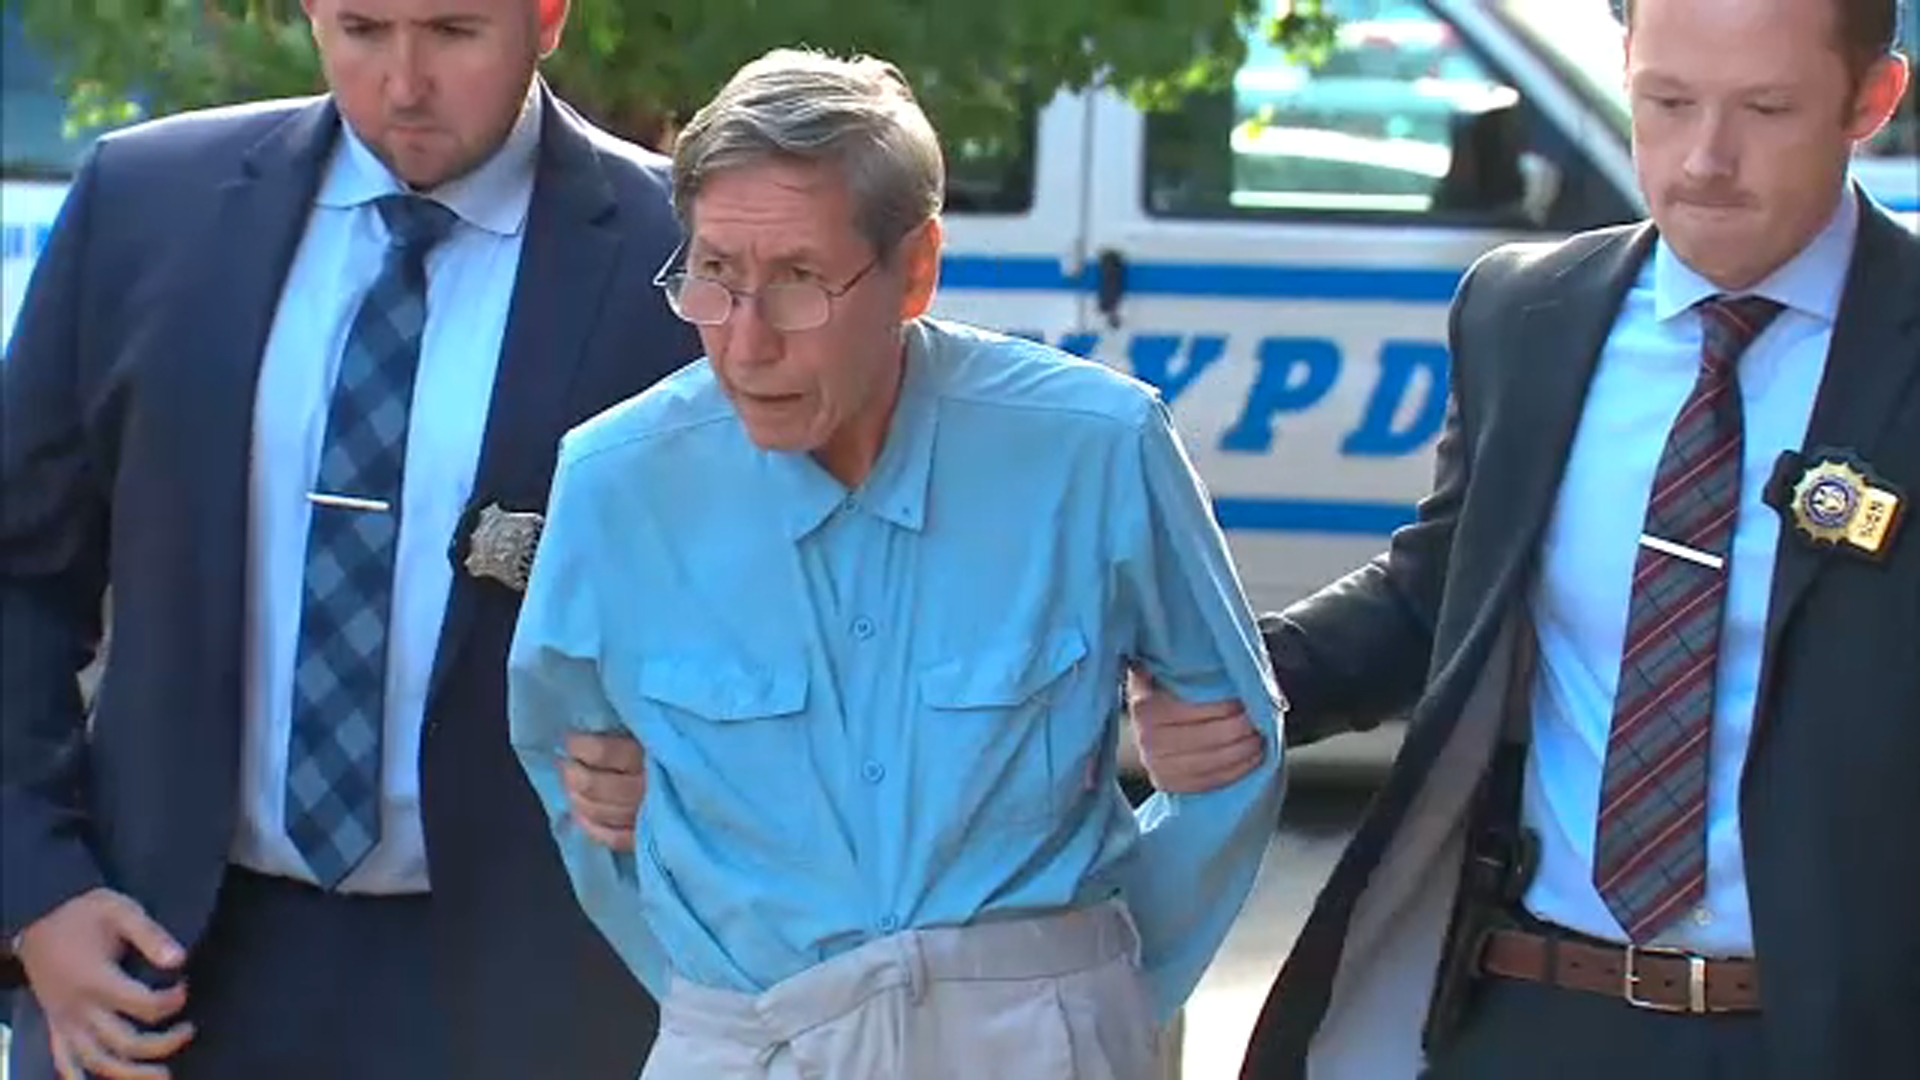 Old Man And 16yers Girl Full Hd Pron Videos - 75-year-old suspect charged with kidnapping, sex assault of 5-year-old girl  in NYC - ABC7 New York